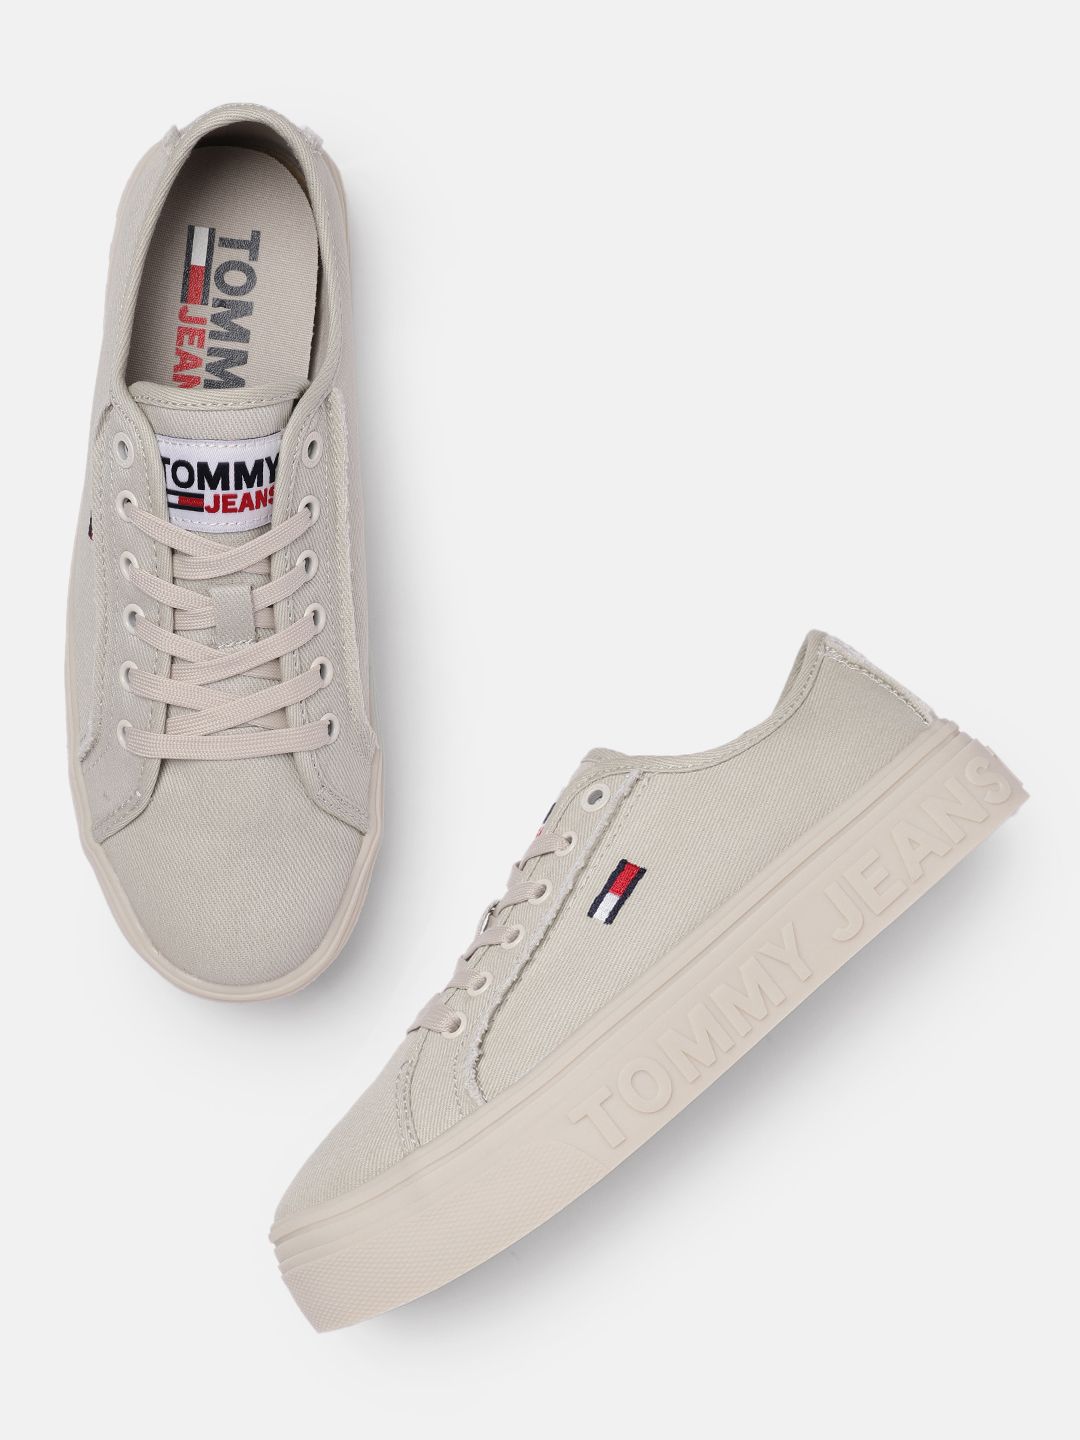 Tommy Hilfiger Women Light Beige Solid Sneakers Price in India